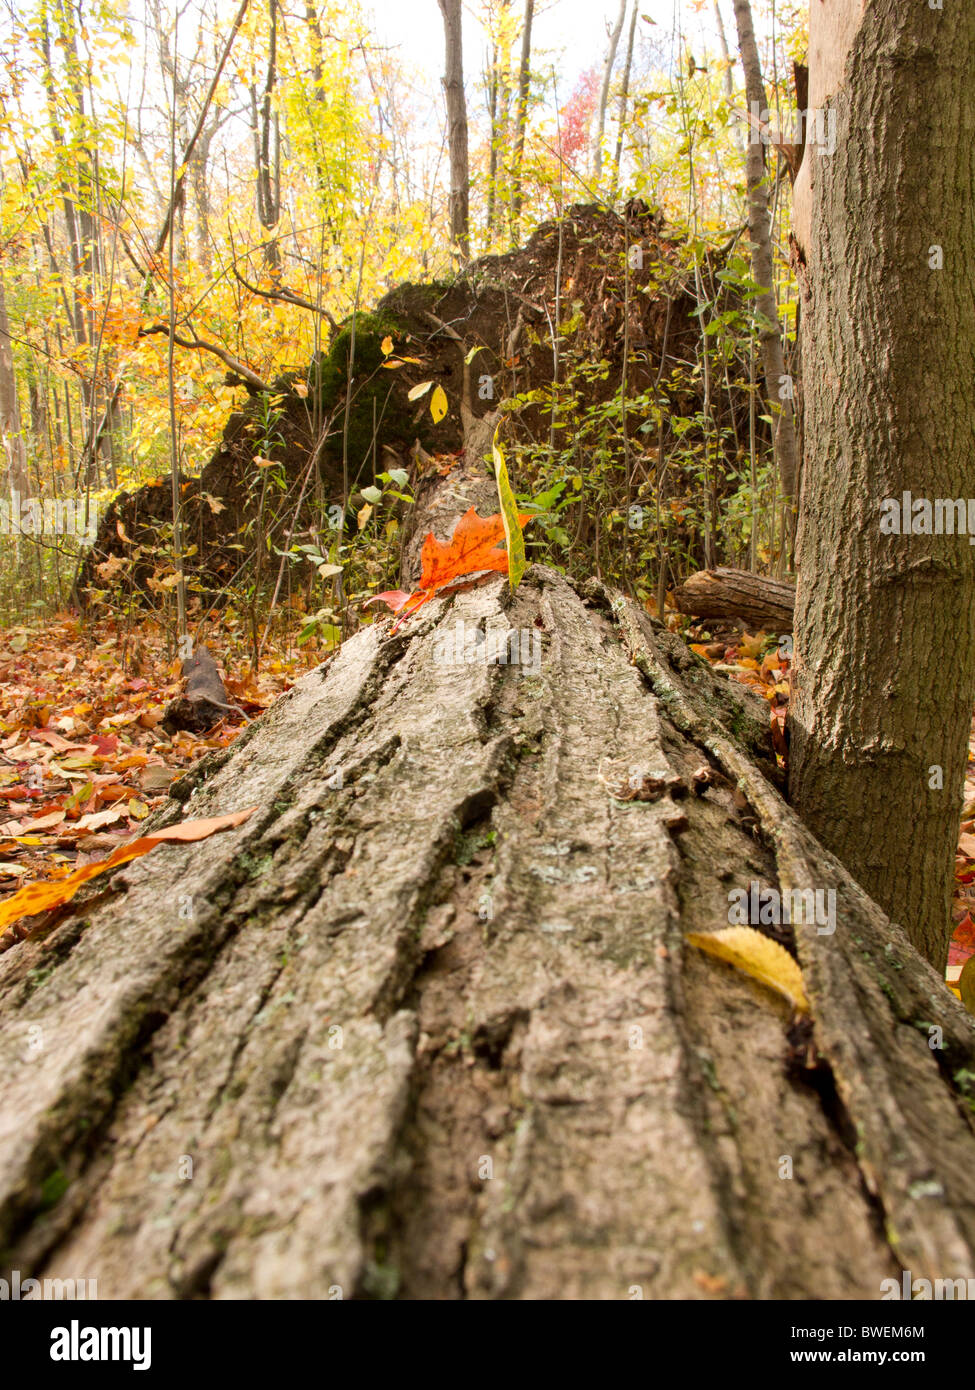 Uprooted tree. Stock Photo